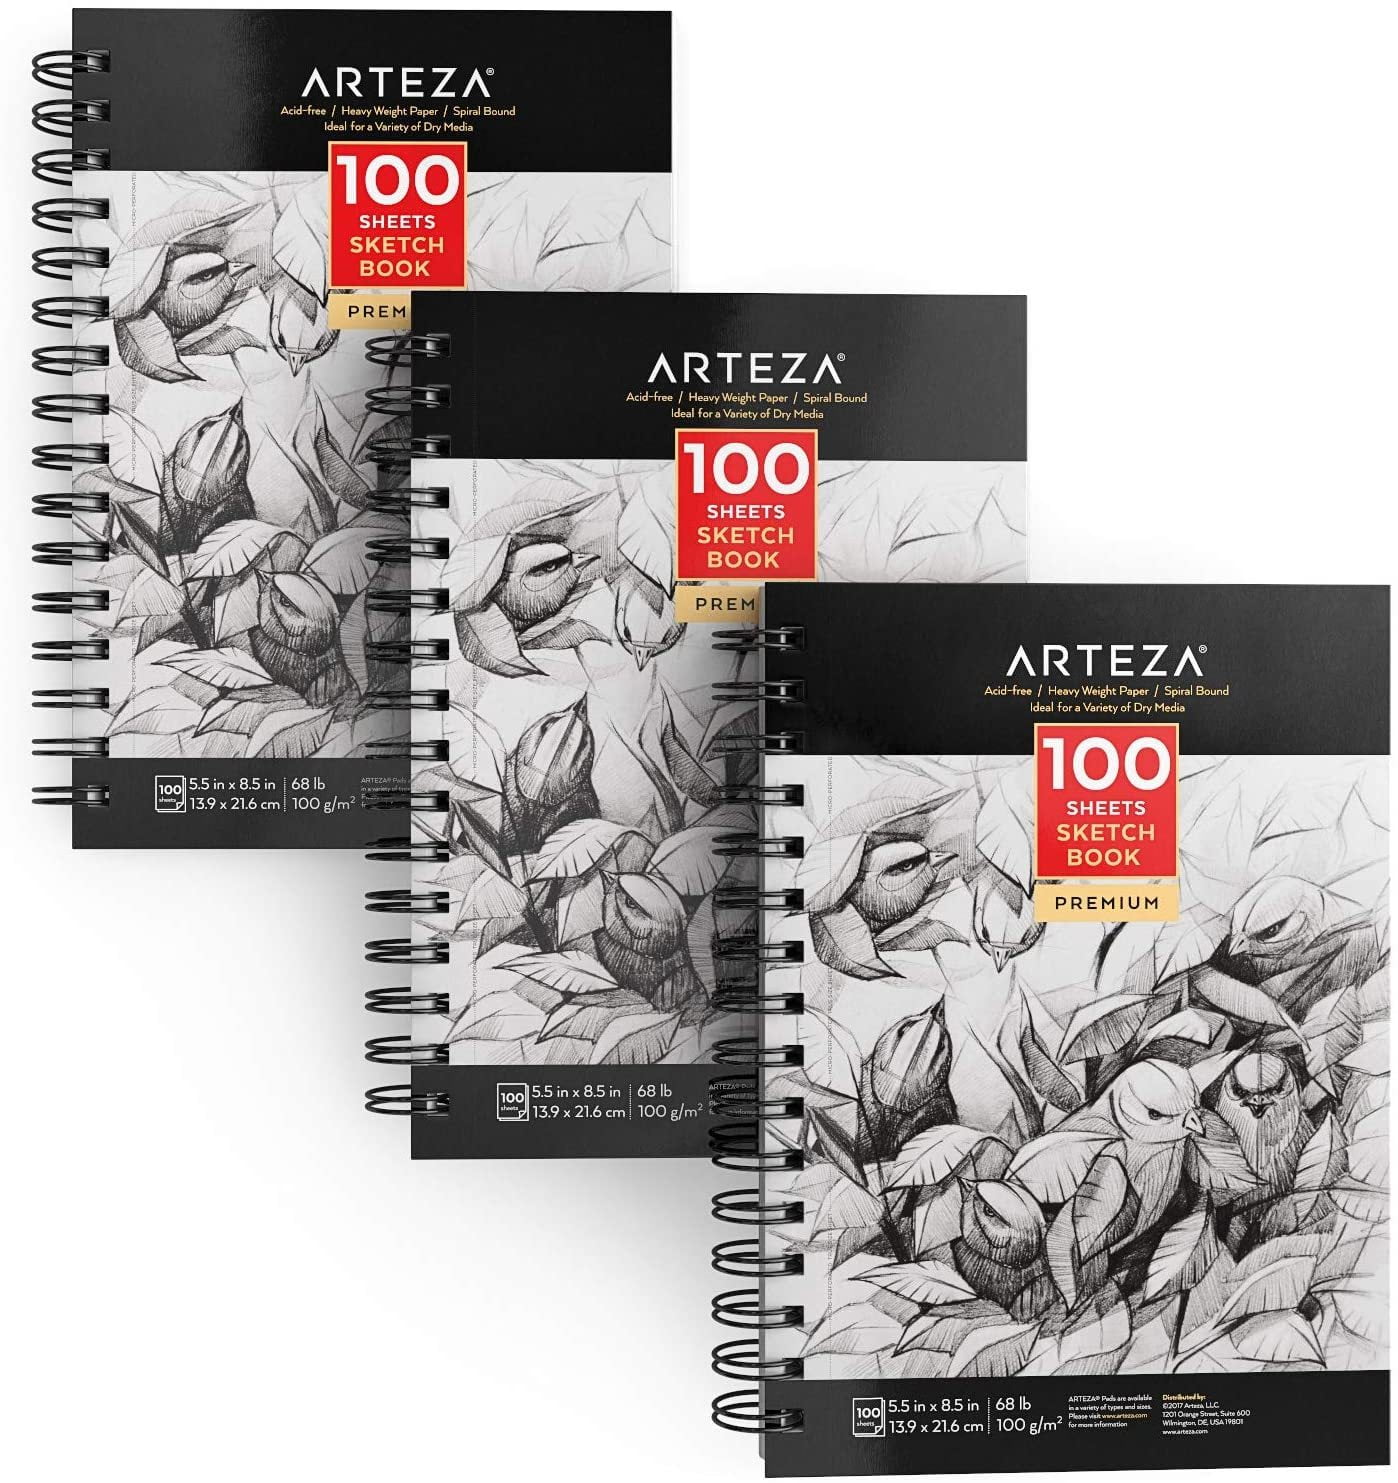  Arteza Small Sketch Book 5.5x8.5 Inches, 3-Pack of Blue Sketch  Pads, 300 Sheets Total, 100 Sheets Each Drawing Book, 68 lb 100 GSM,  Spiral-Bound Hardcover Drawing Pad Set for Dry Media 